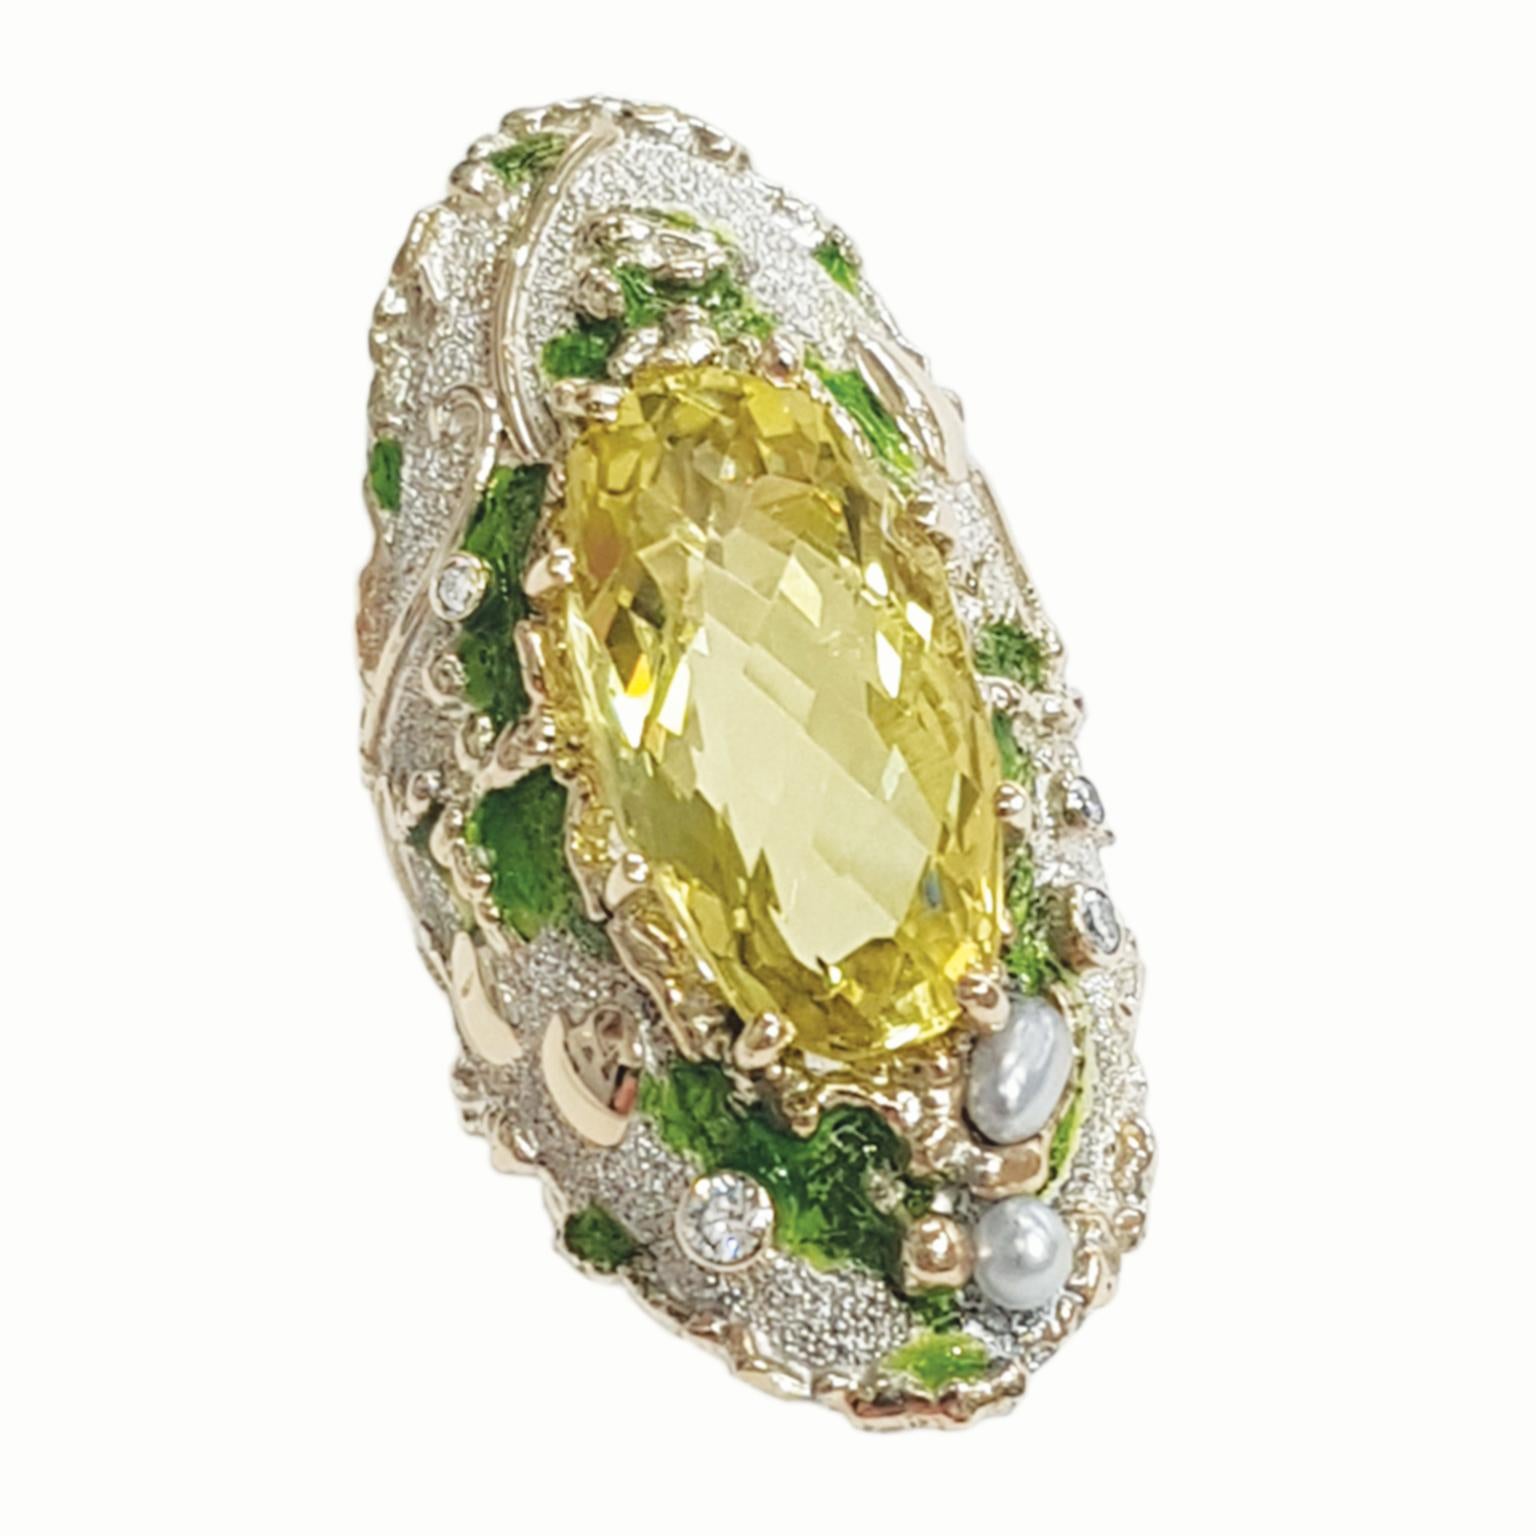 Paul Amey’s “Lemon Sherbet” ring is a totally unique and completely handcrafted and created by Paul Amey. This signature molten edge natural yellow quartz, diamond and pearl ring was crafted from Sterling Silver with 9K yellow gold and green enamel.